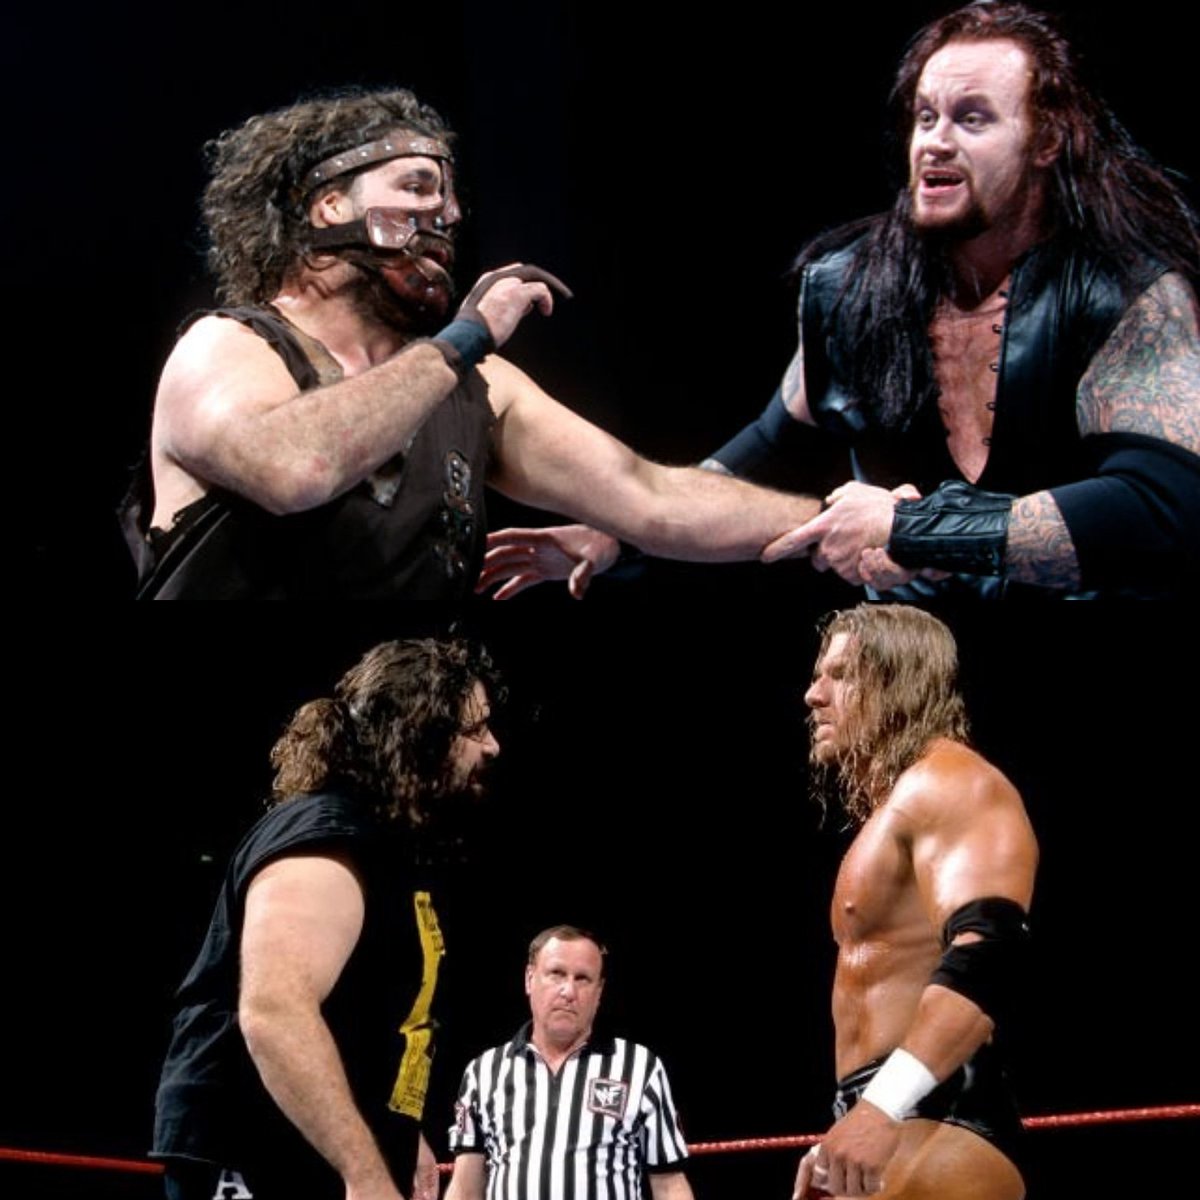 Better rivalry? Mankind vs. The Undertaker? Or Cactus Jack vs. Triple H! There's honestly no wrong answer. Both feuds were epic, but which did u prefer?🤔

#mankind #theundertaker #mrsfoleysbabyboy #thephenom #haveaniceday #restinpeace #cactusjack #tripleh #bangbang #thegame #wwe